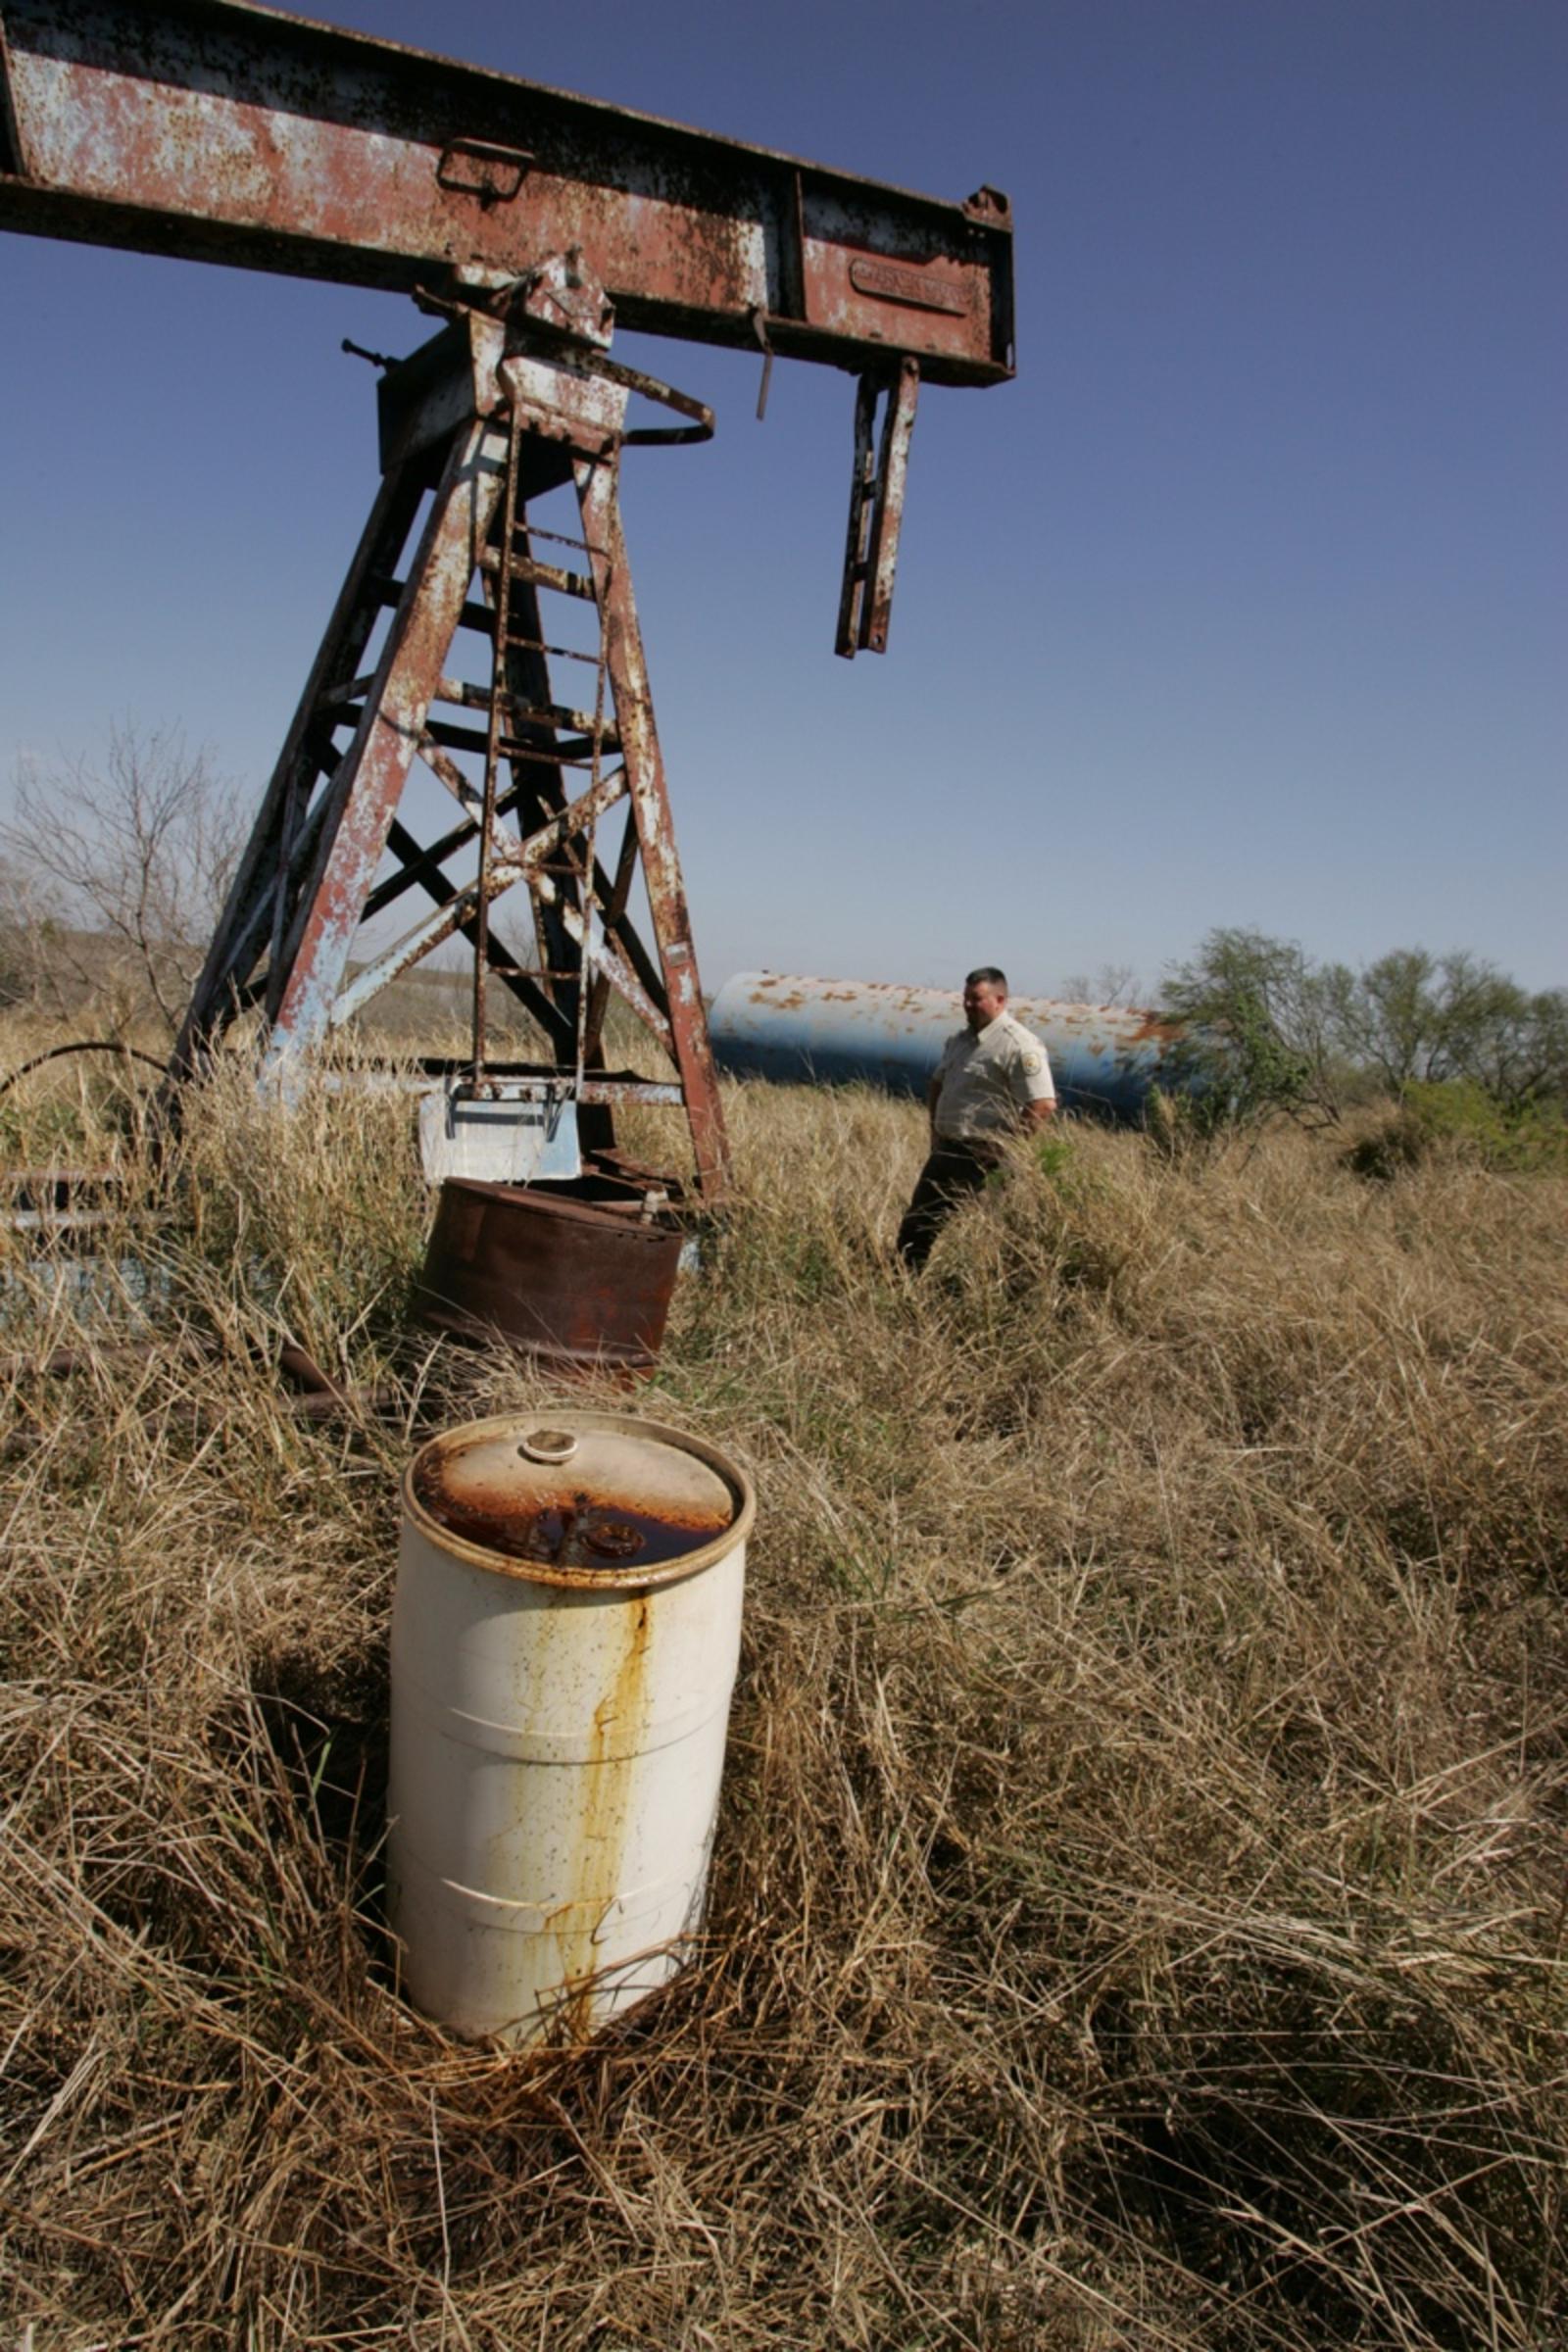 An abandoned oil well in the Lower Grande Valley National Wildlife Refuge, Texas. Photo courtesy US Fish and Wildlife Service